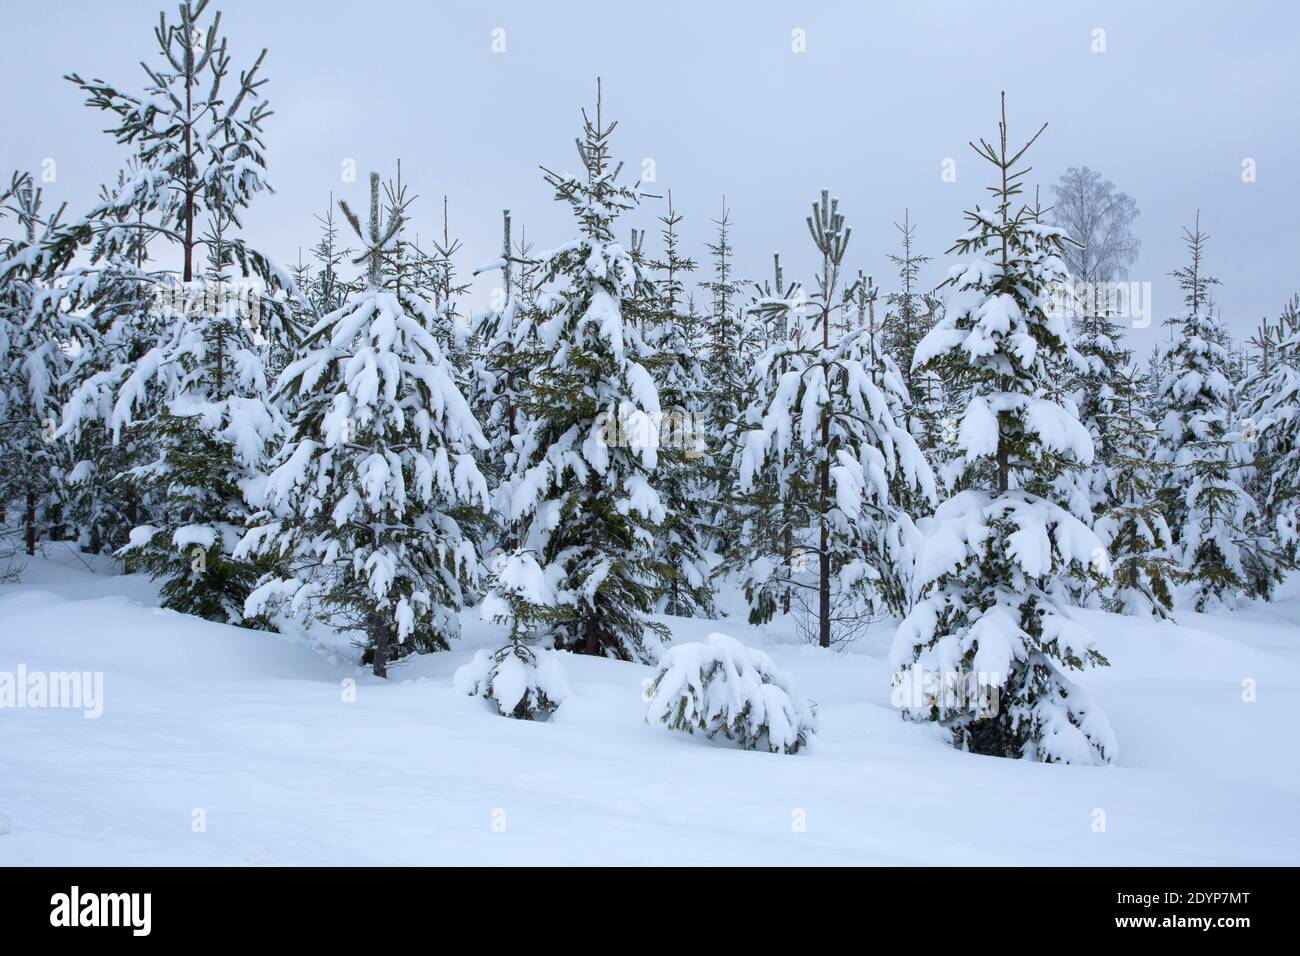 Norway Spruce trees, Picea abies, covered in snow in a winter landscape, Taken February, Svartadalen, Central Sweden Stock Photo